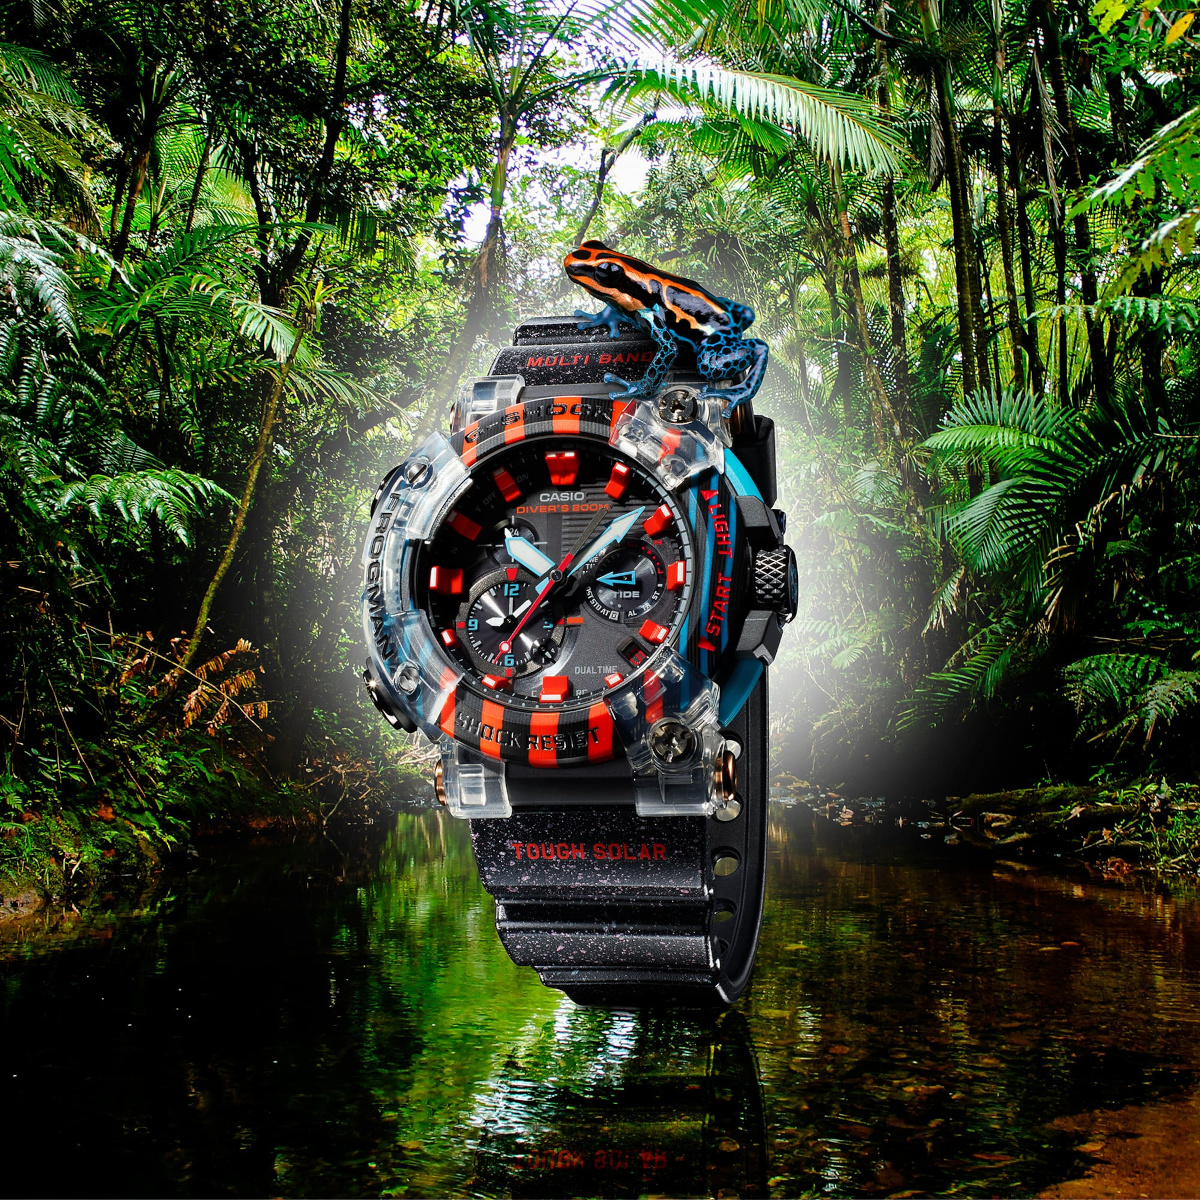 G-Shock GWF-A1000APF-1A based on the Amazon poison dart frog